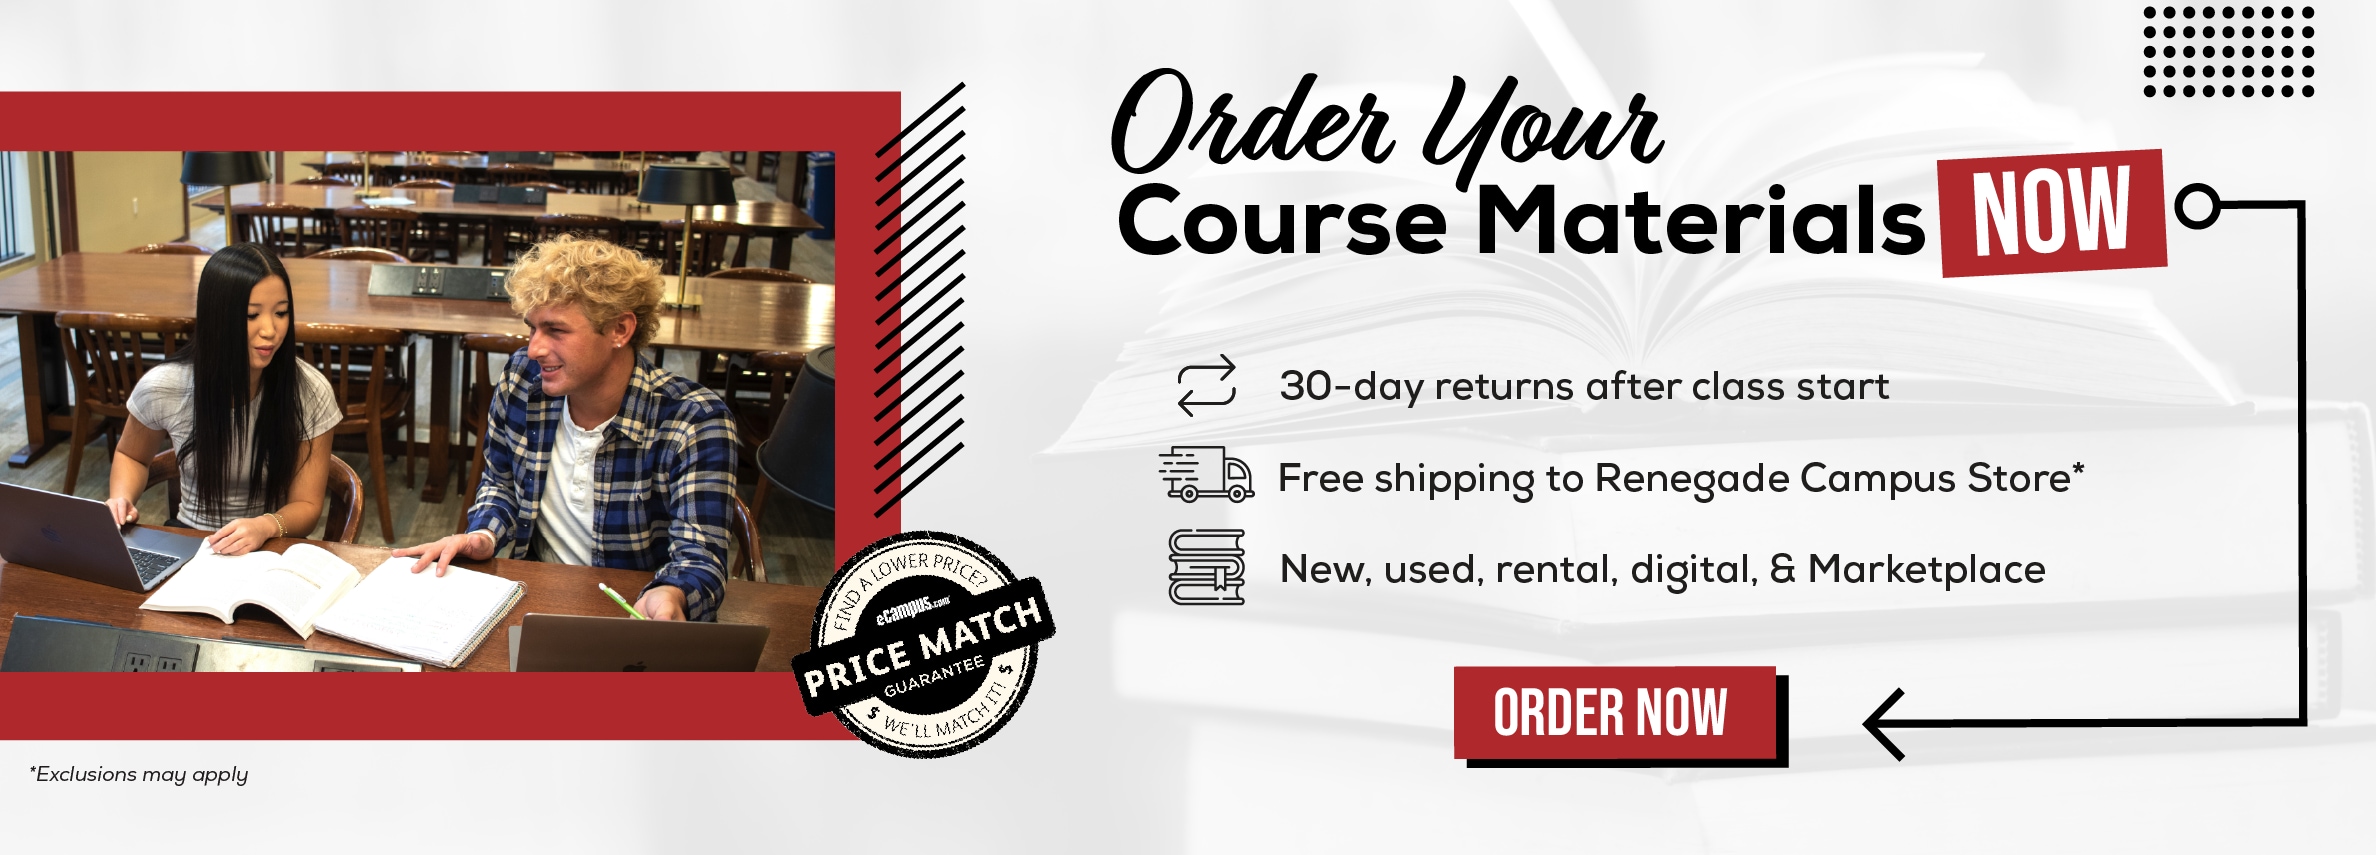 Order Your Course Materials Now. 30-day returns after class start. Free shipping to Renegade Campus Store*. New, used, rental, digital, & Marketplace. Order now. *Exclusions may apply.